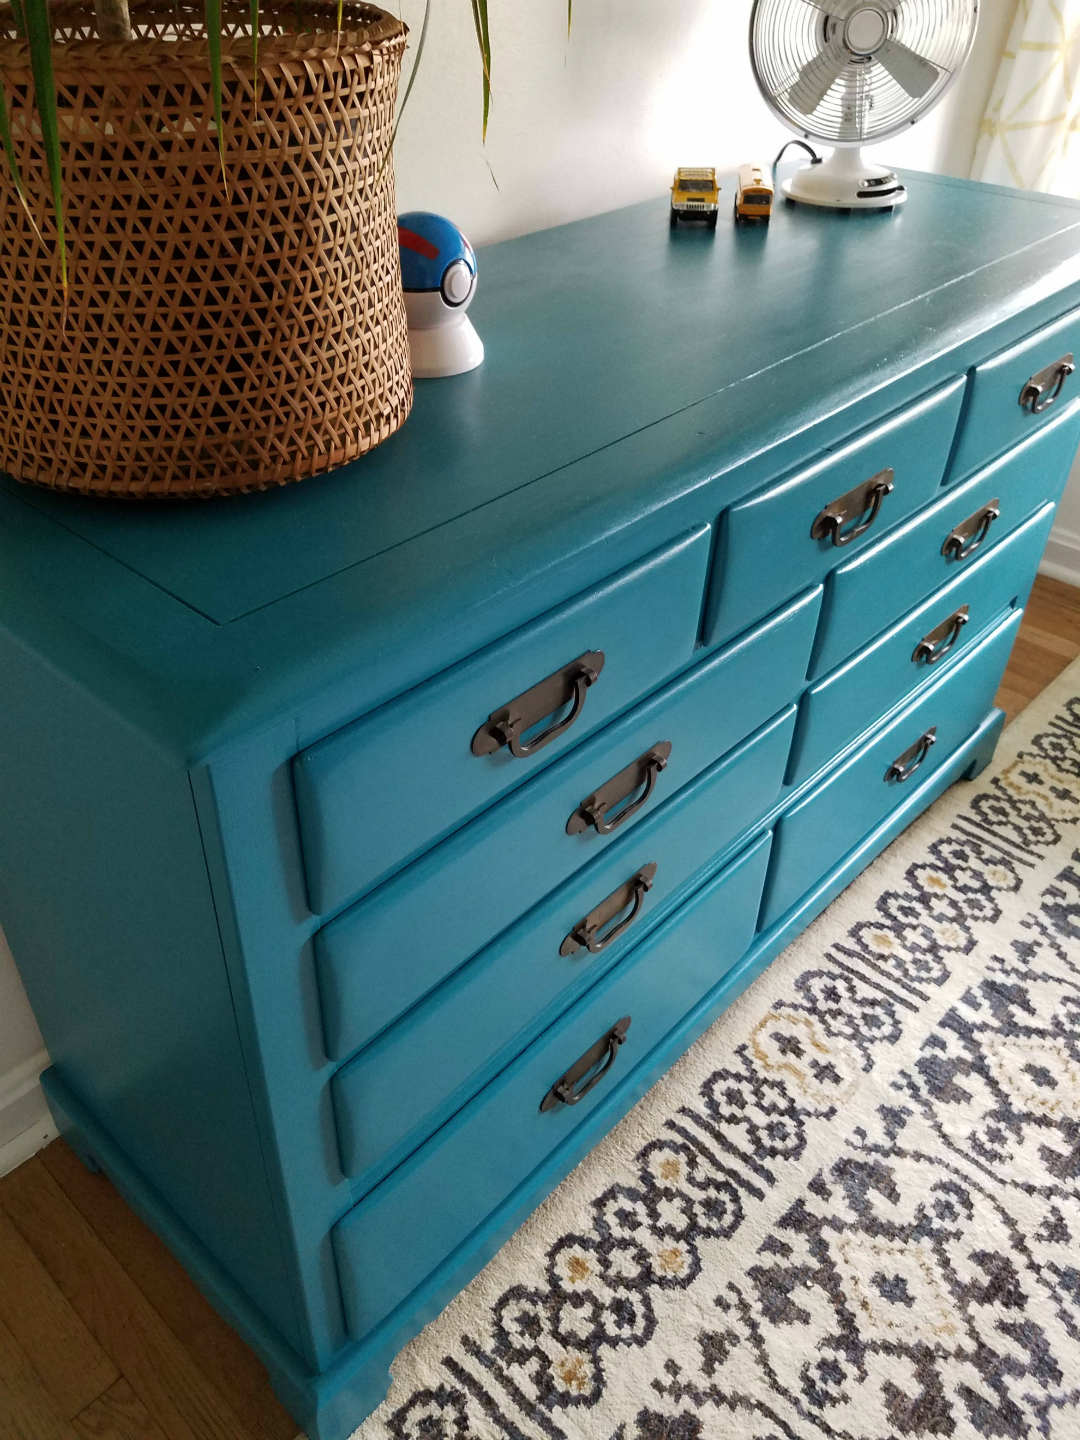 Pin This Ideas! Easy Projects For Big Impact Design - Paint A Bright Teal Dresser TheBohoAbode Project